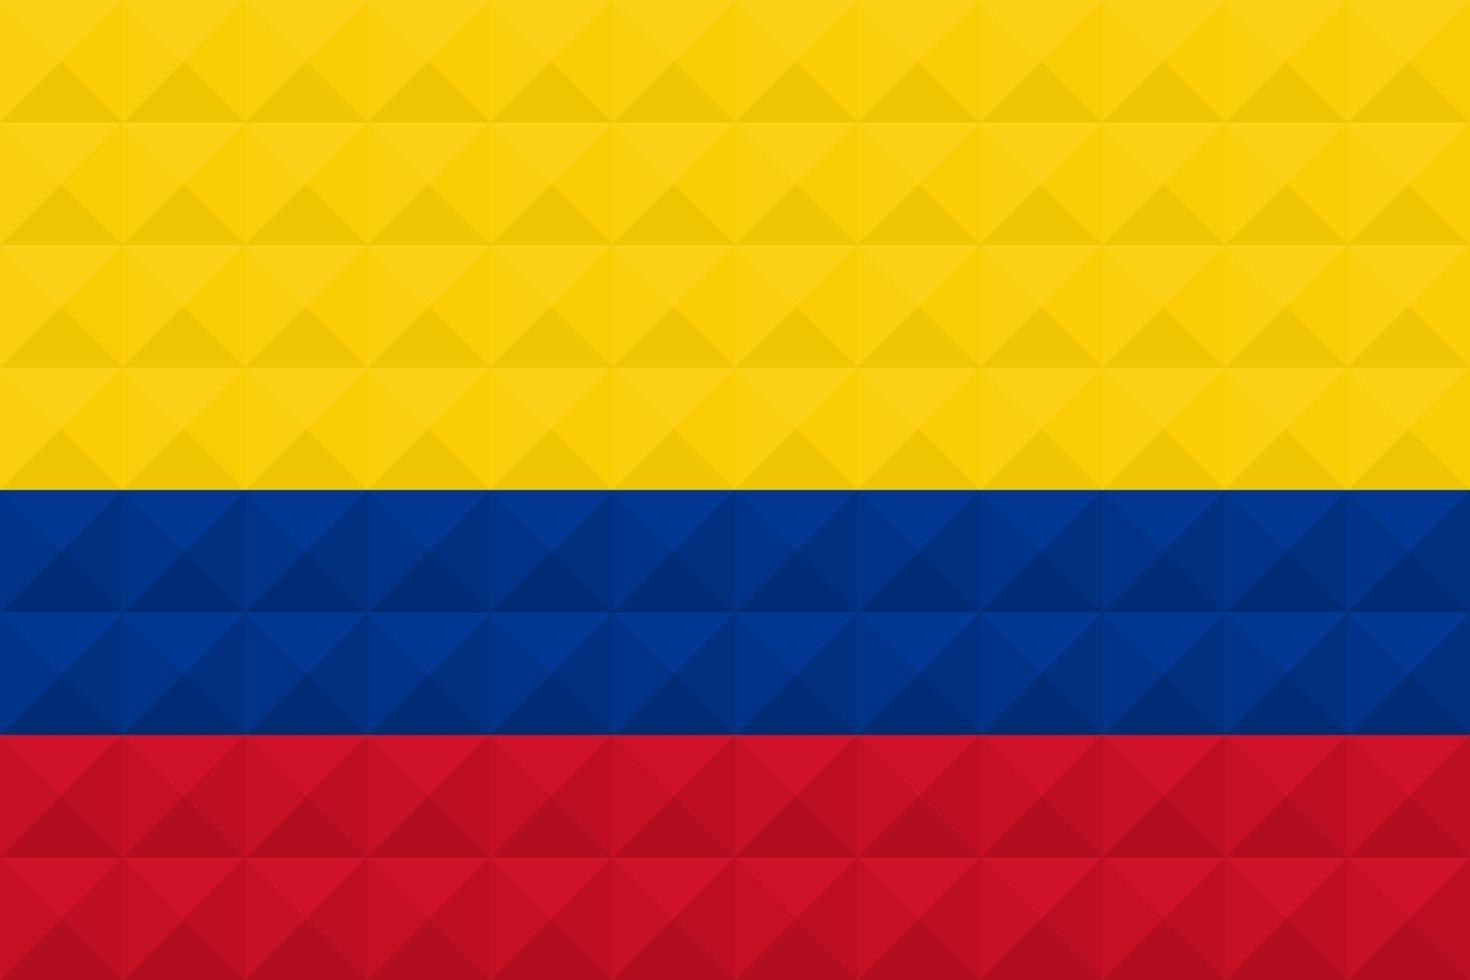 Artistic flag of Colombia with geometric wave concept art design vector